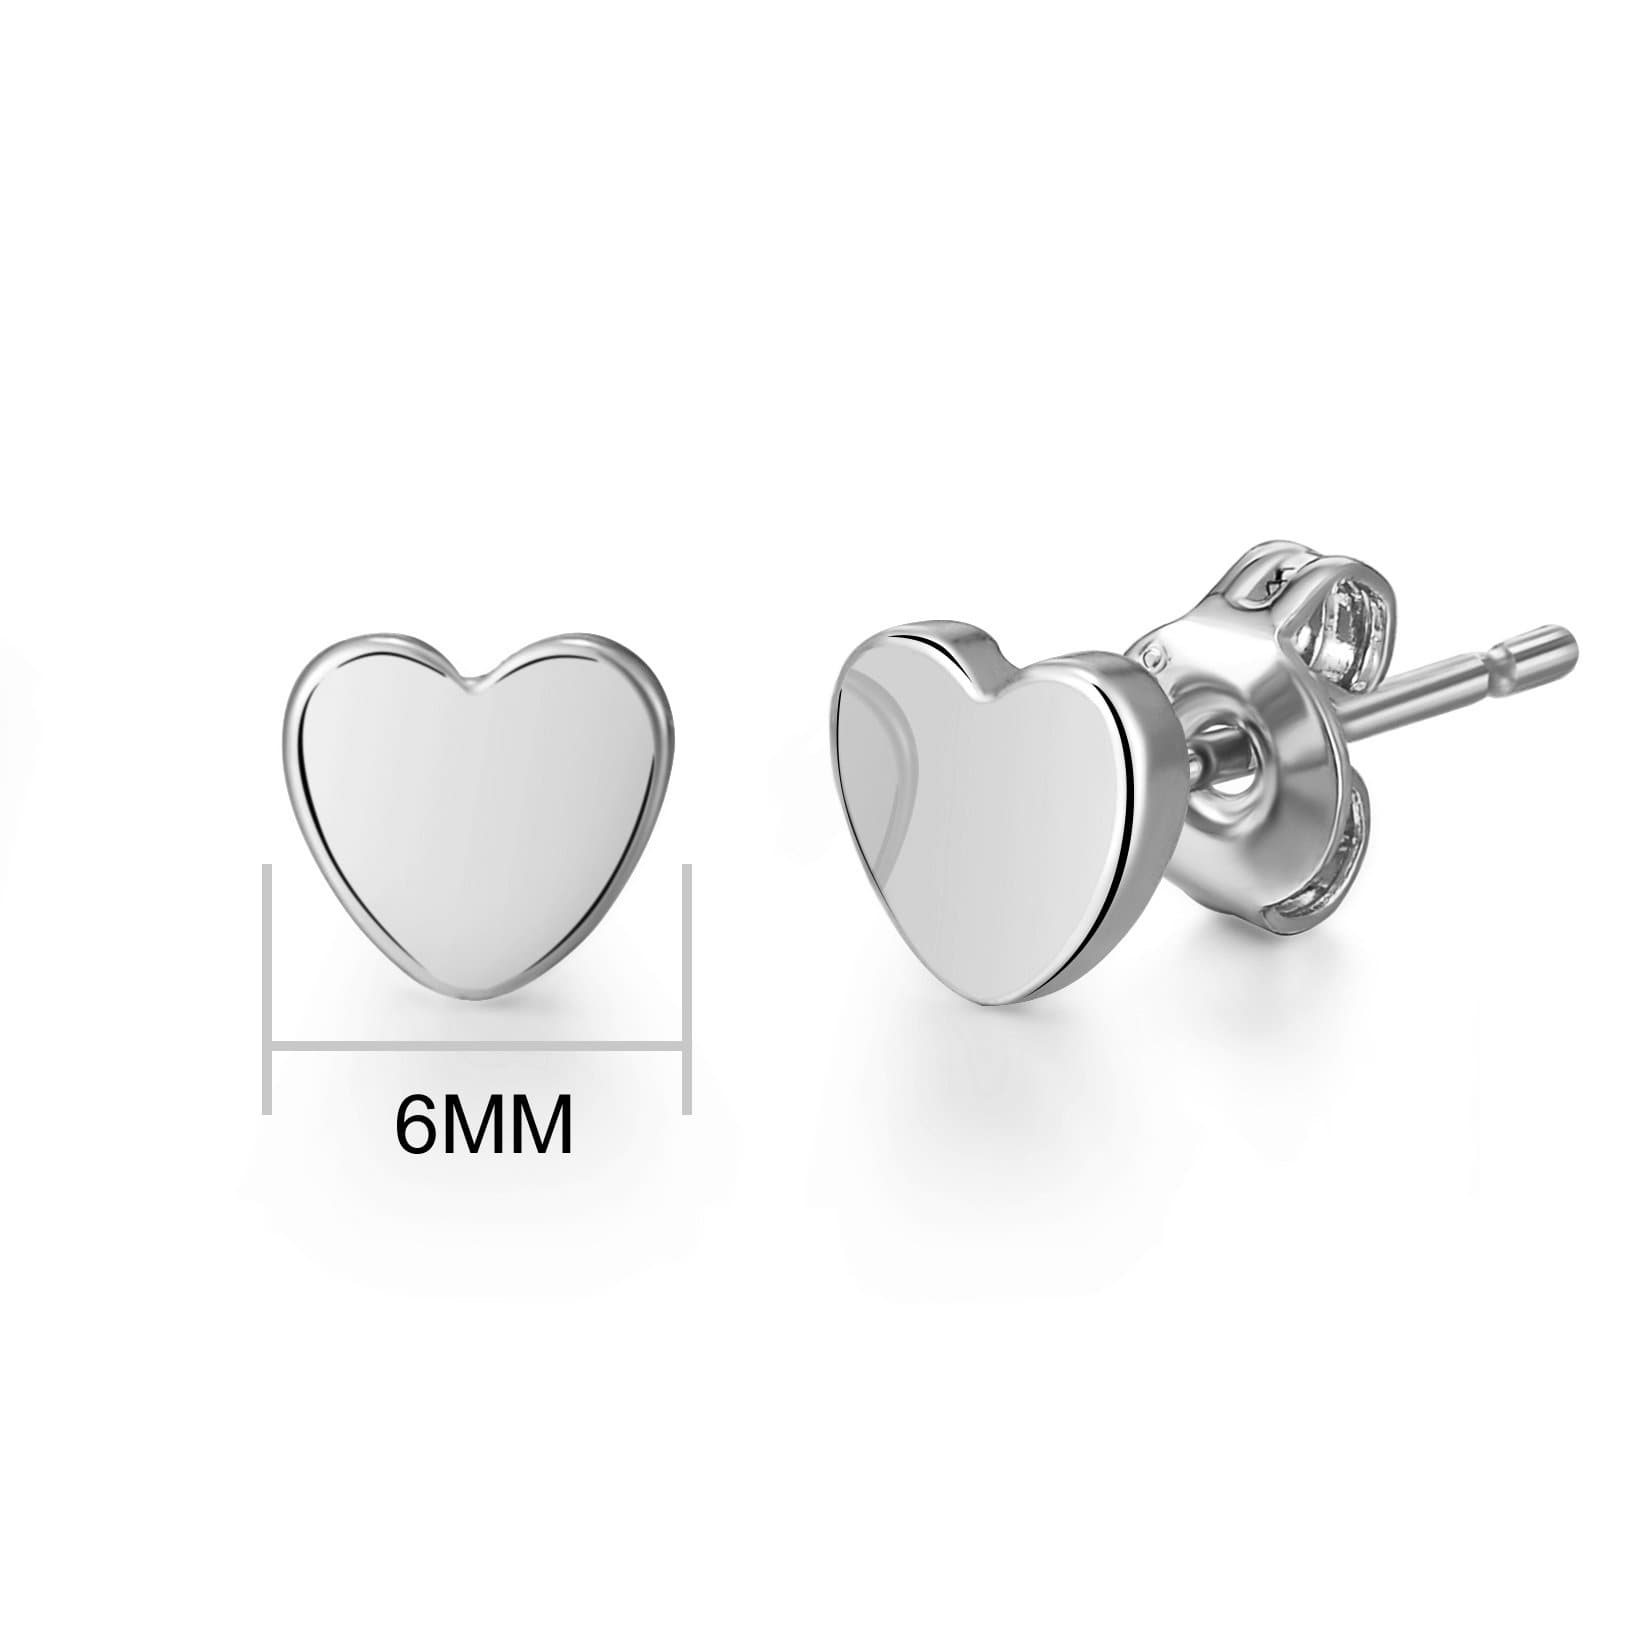 Silver Plated Sister Heart Stud Earrings with Quote Card